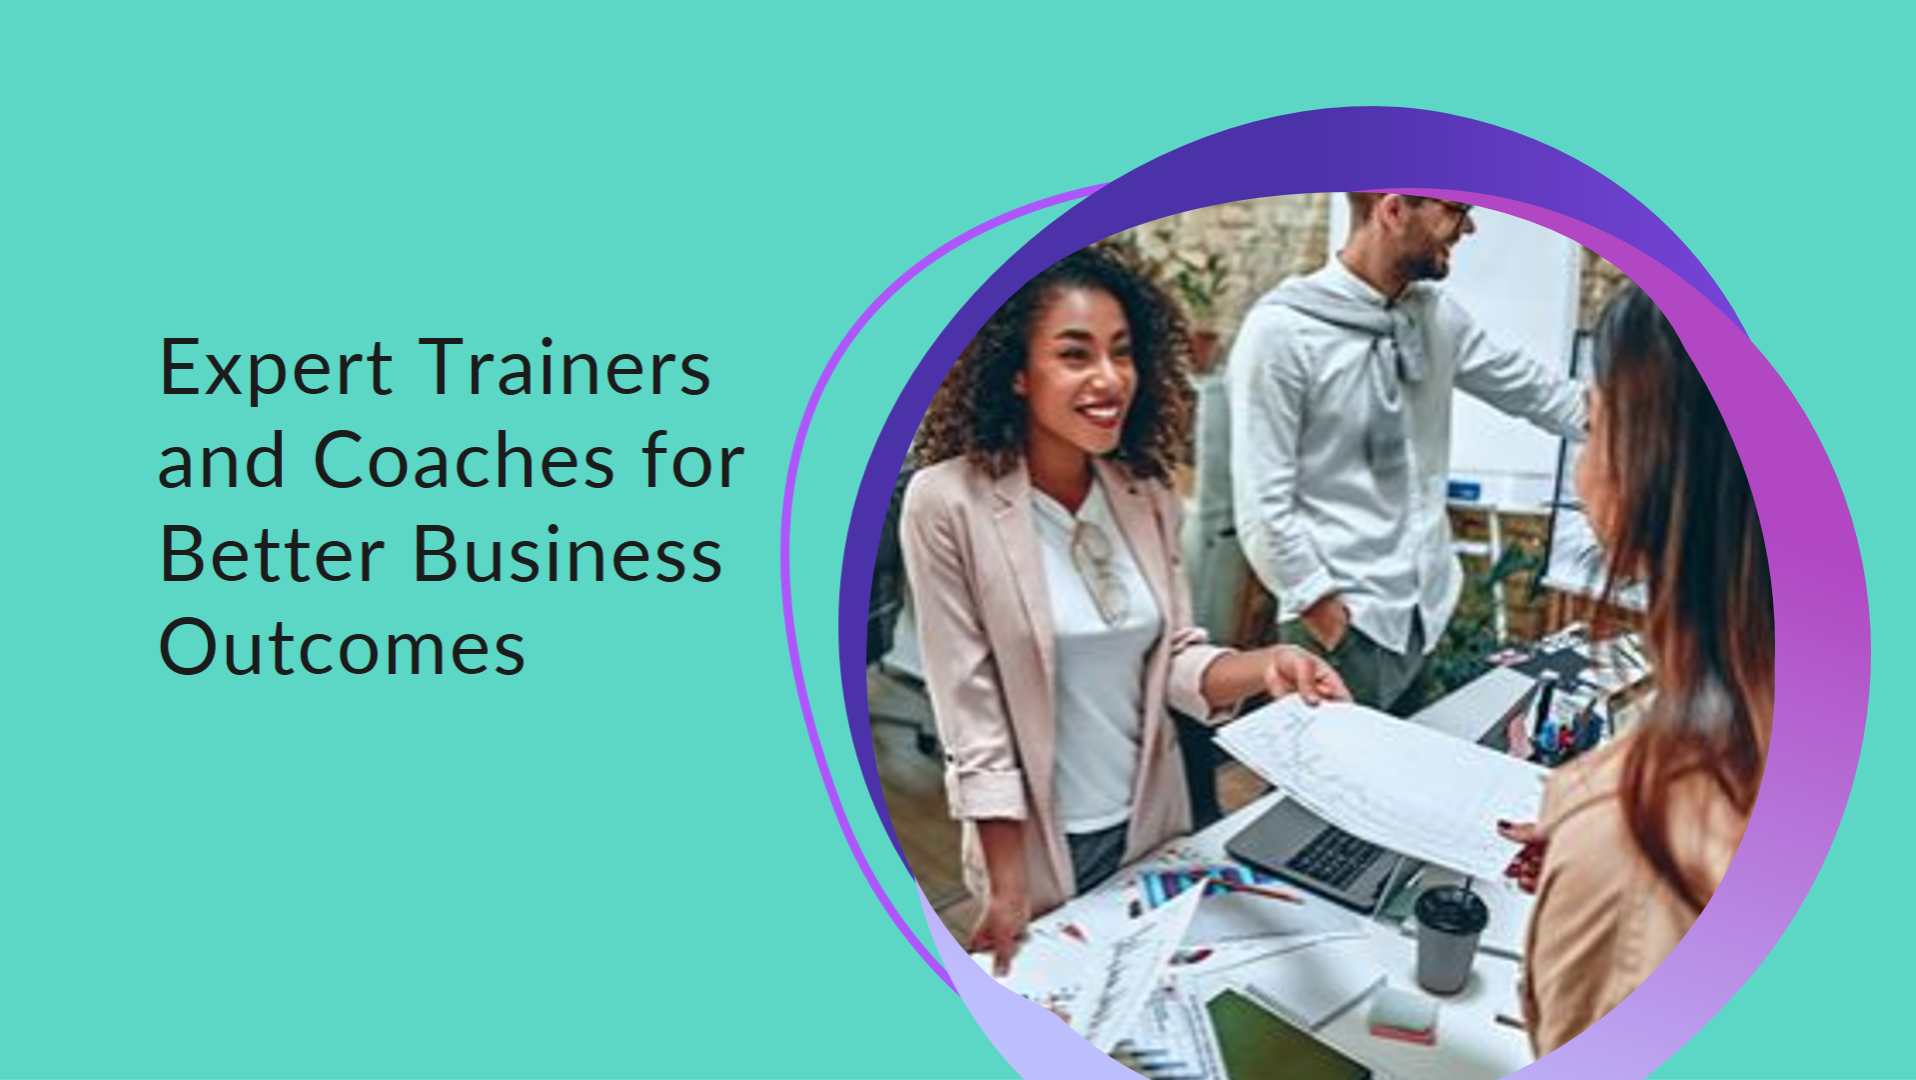 How Expert Trainers and Coaches Improve Business Outcomes